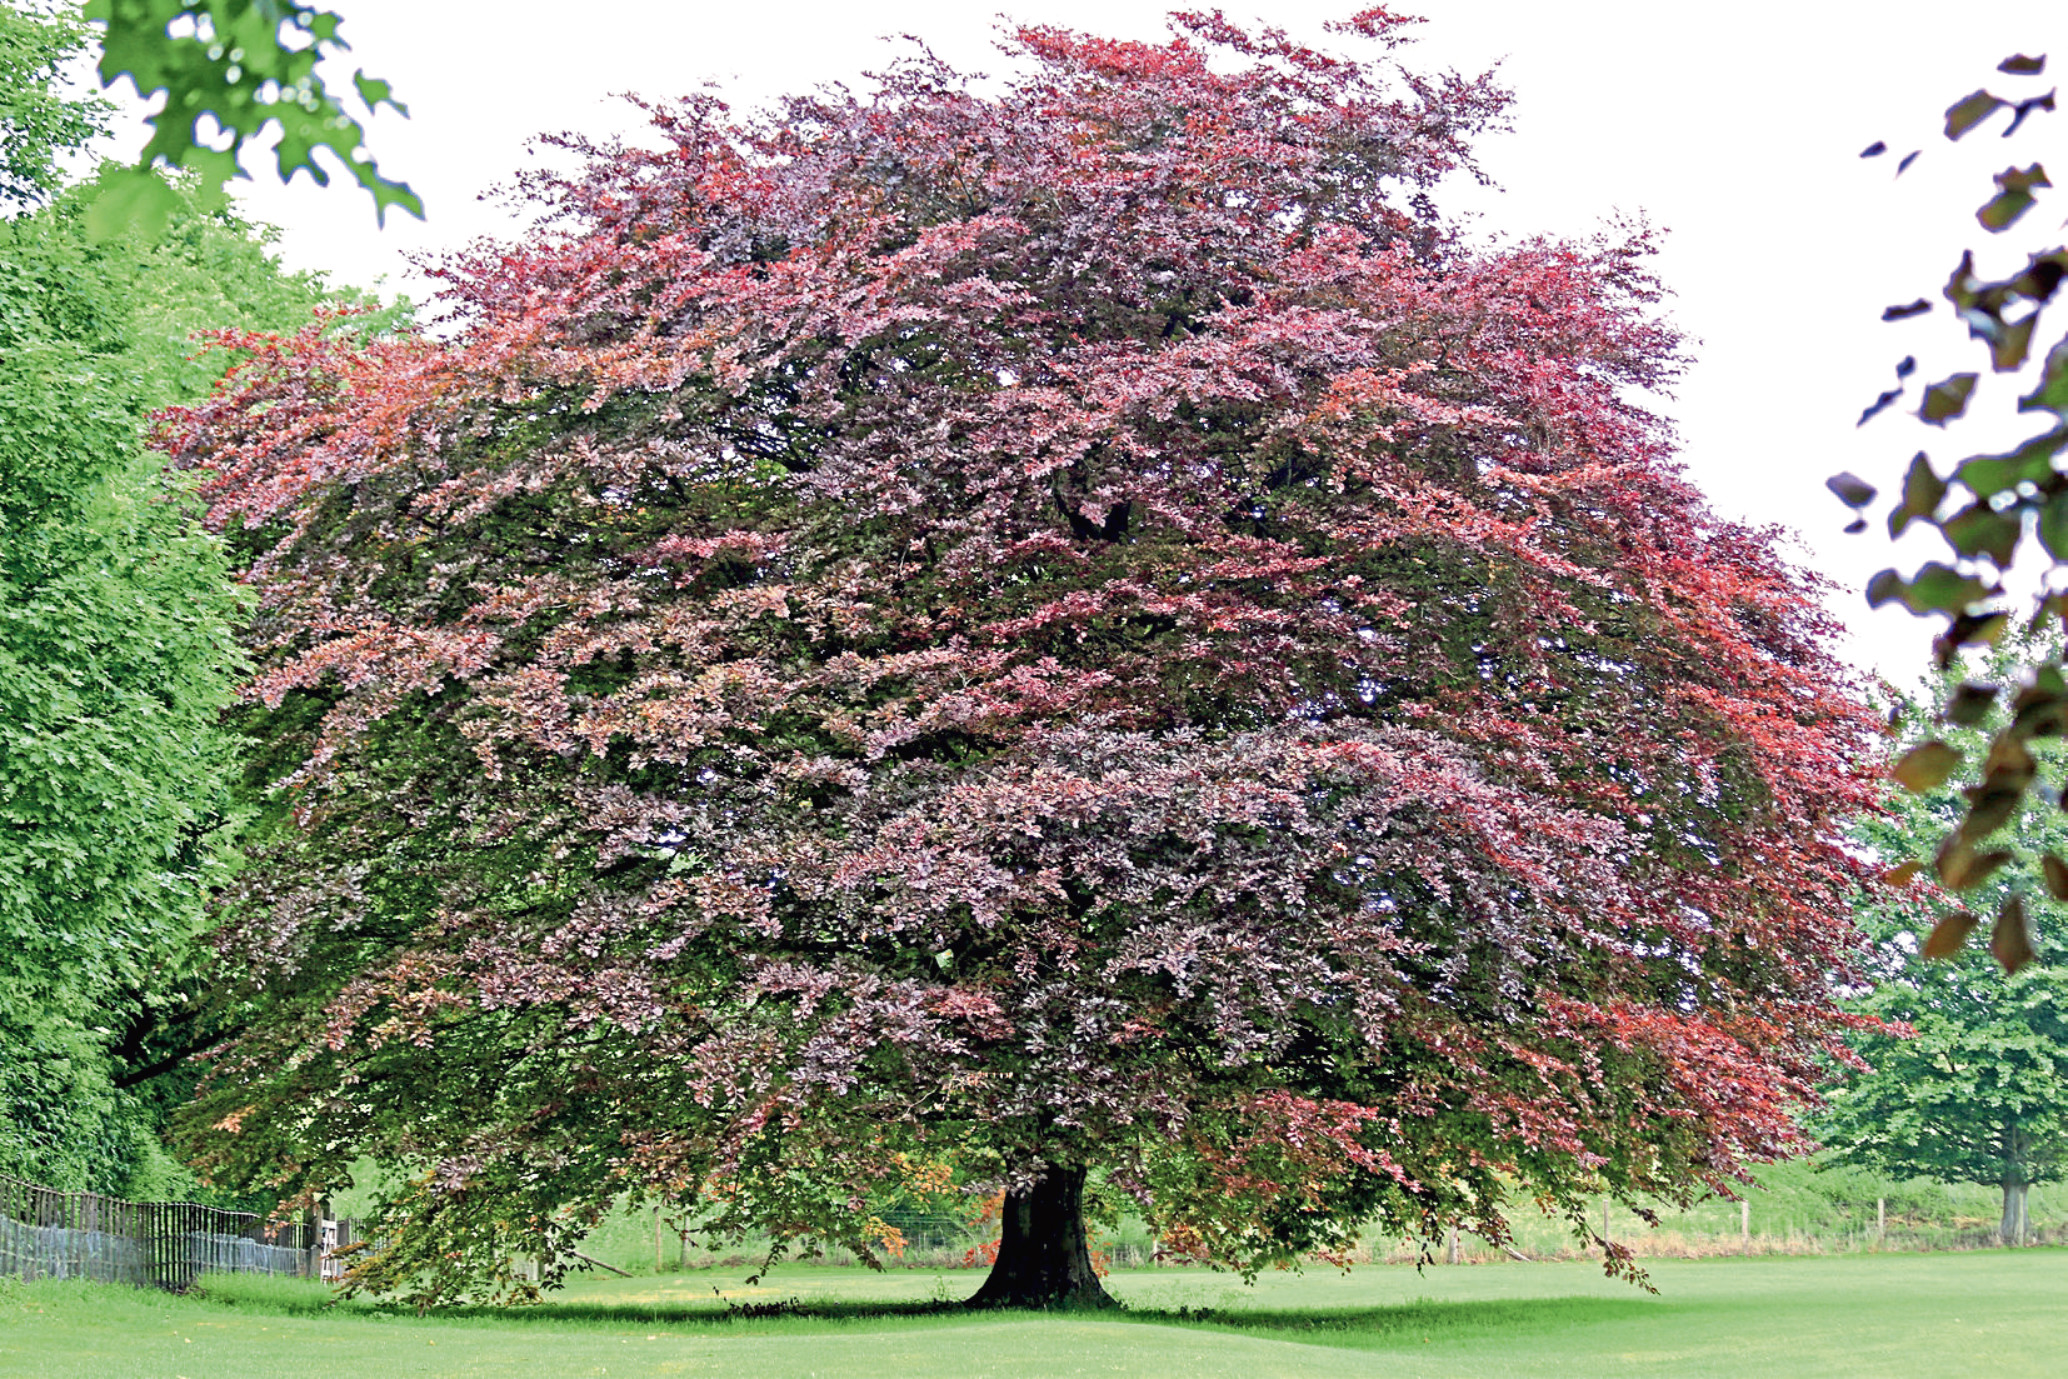 A fagus sylvatica purpurea or copper beech tree. Trees have had a special place in our culture for thousands of years